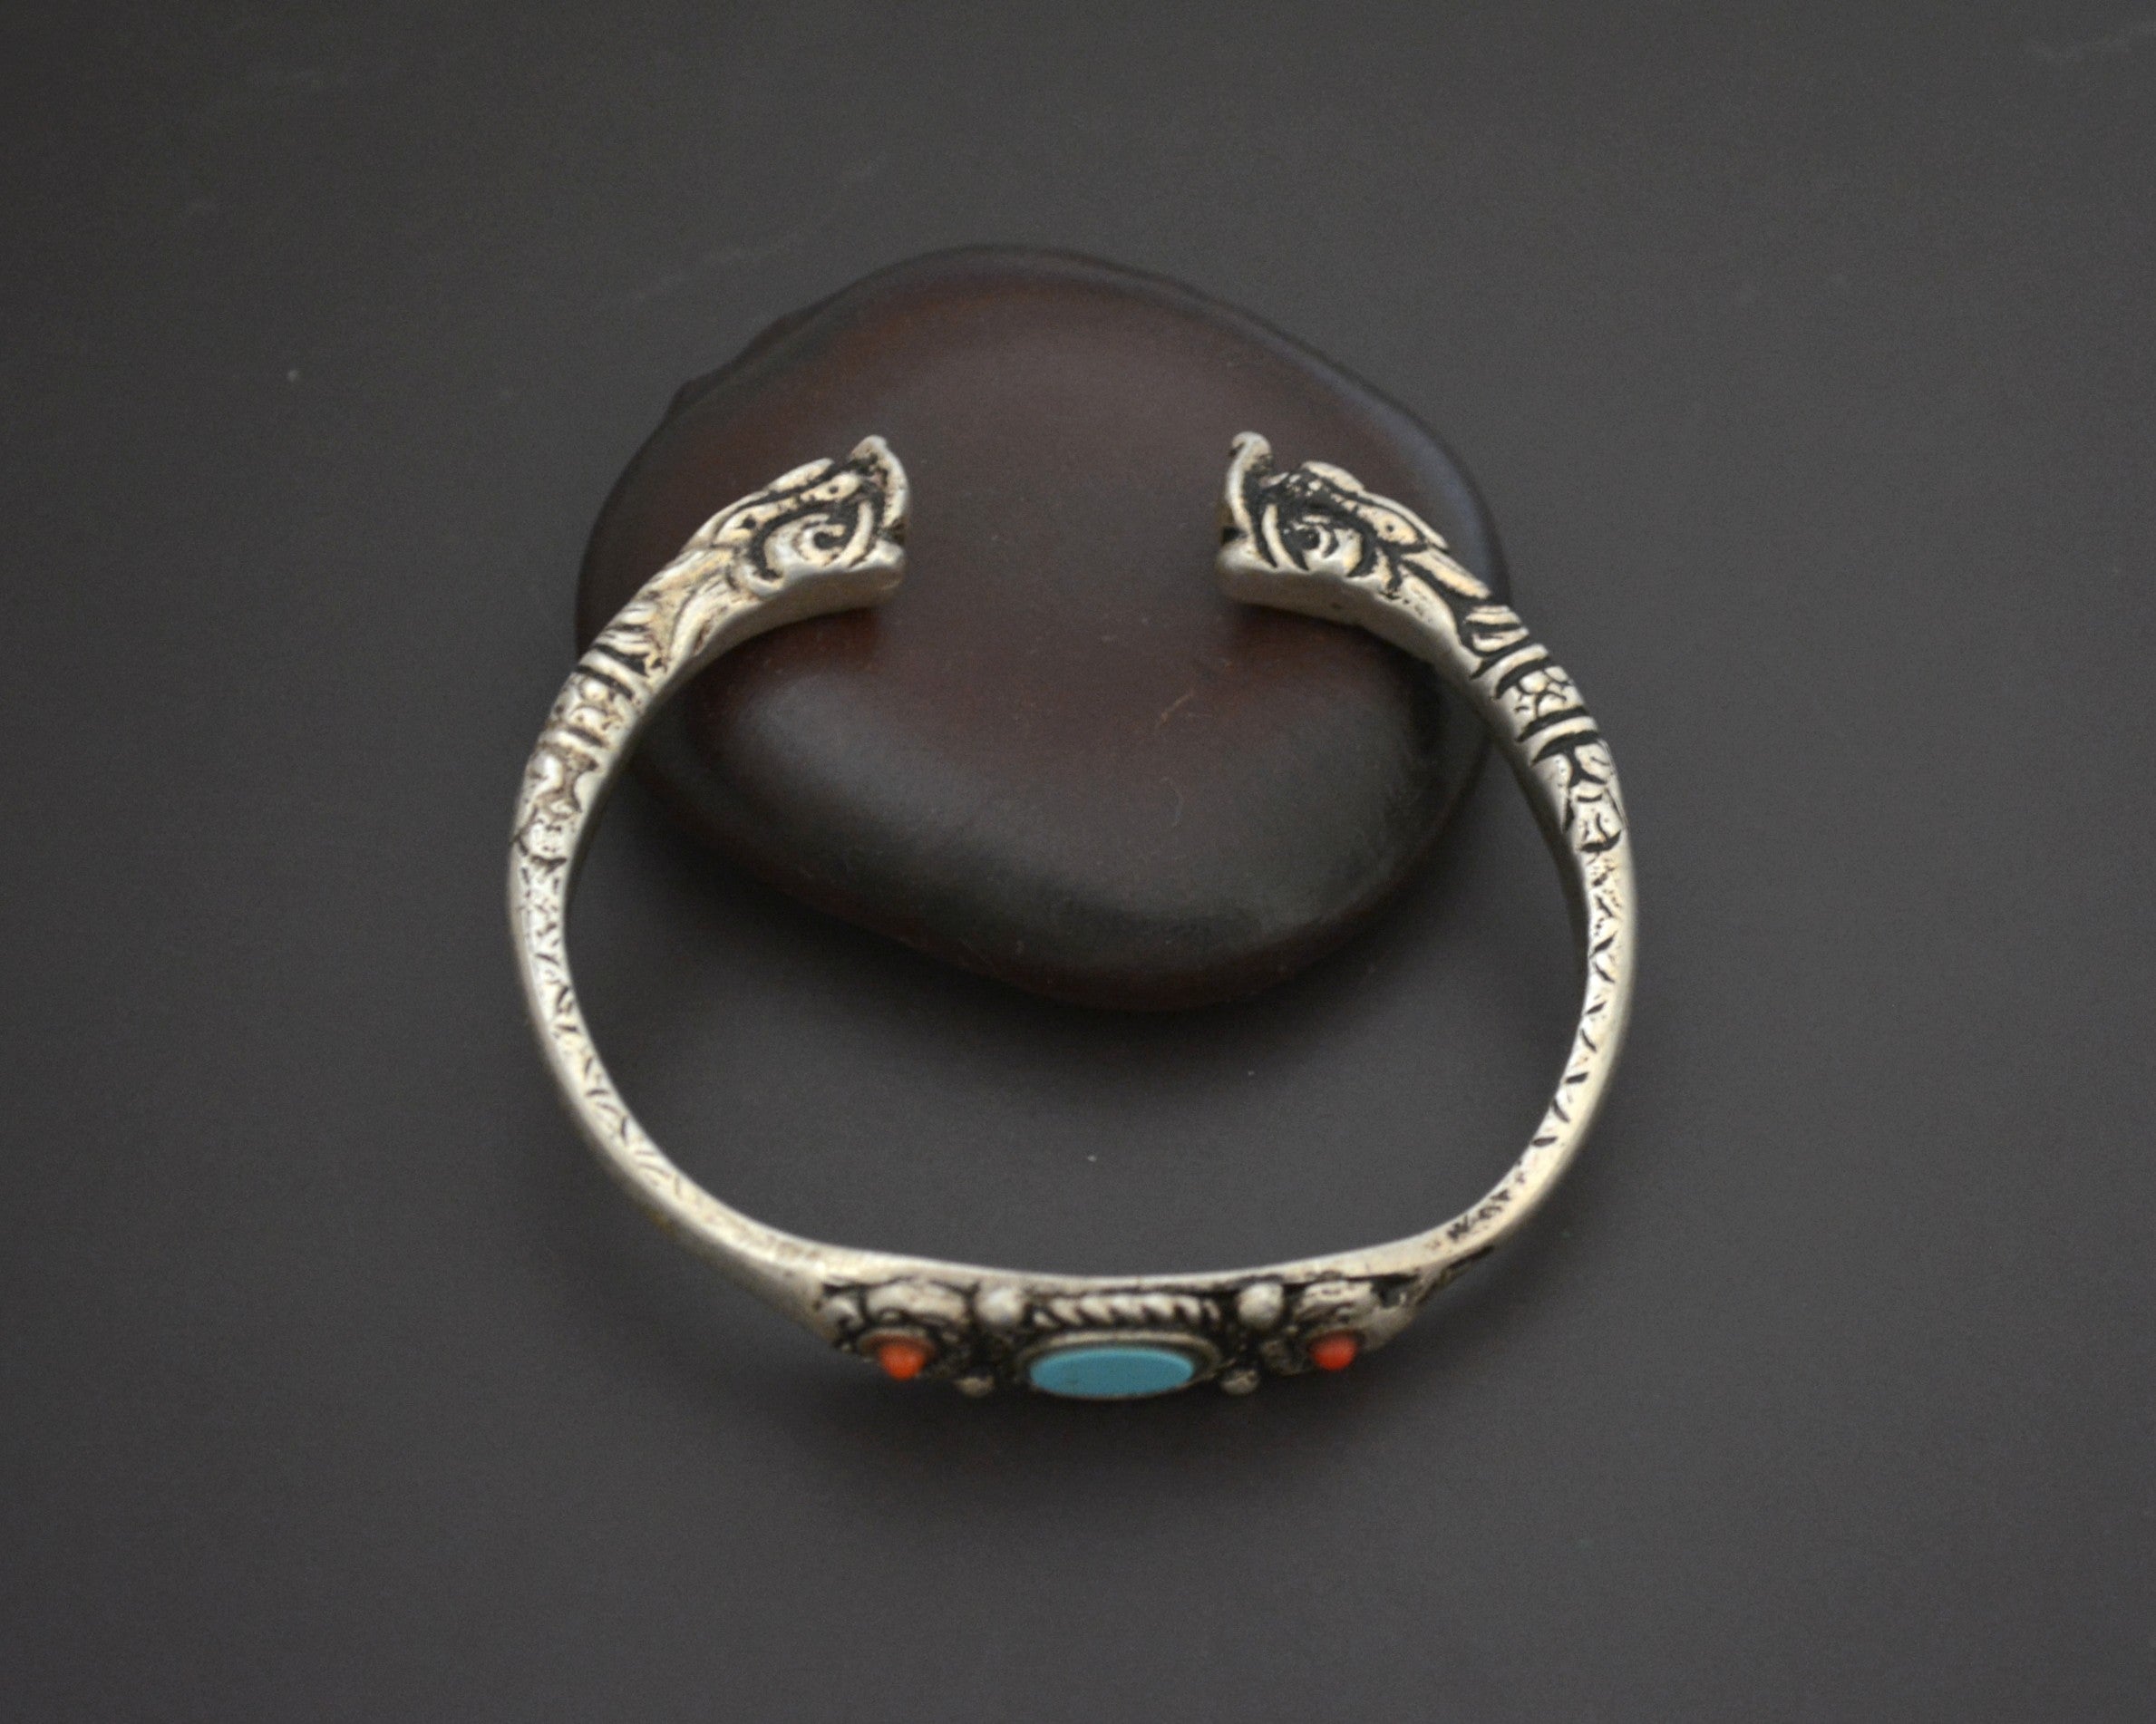 Small Makara Head Bracelet with Coral and Turquoise